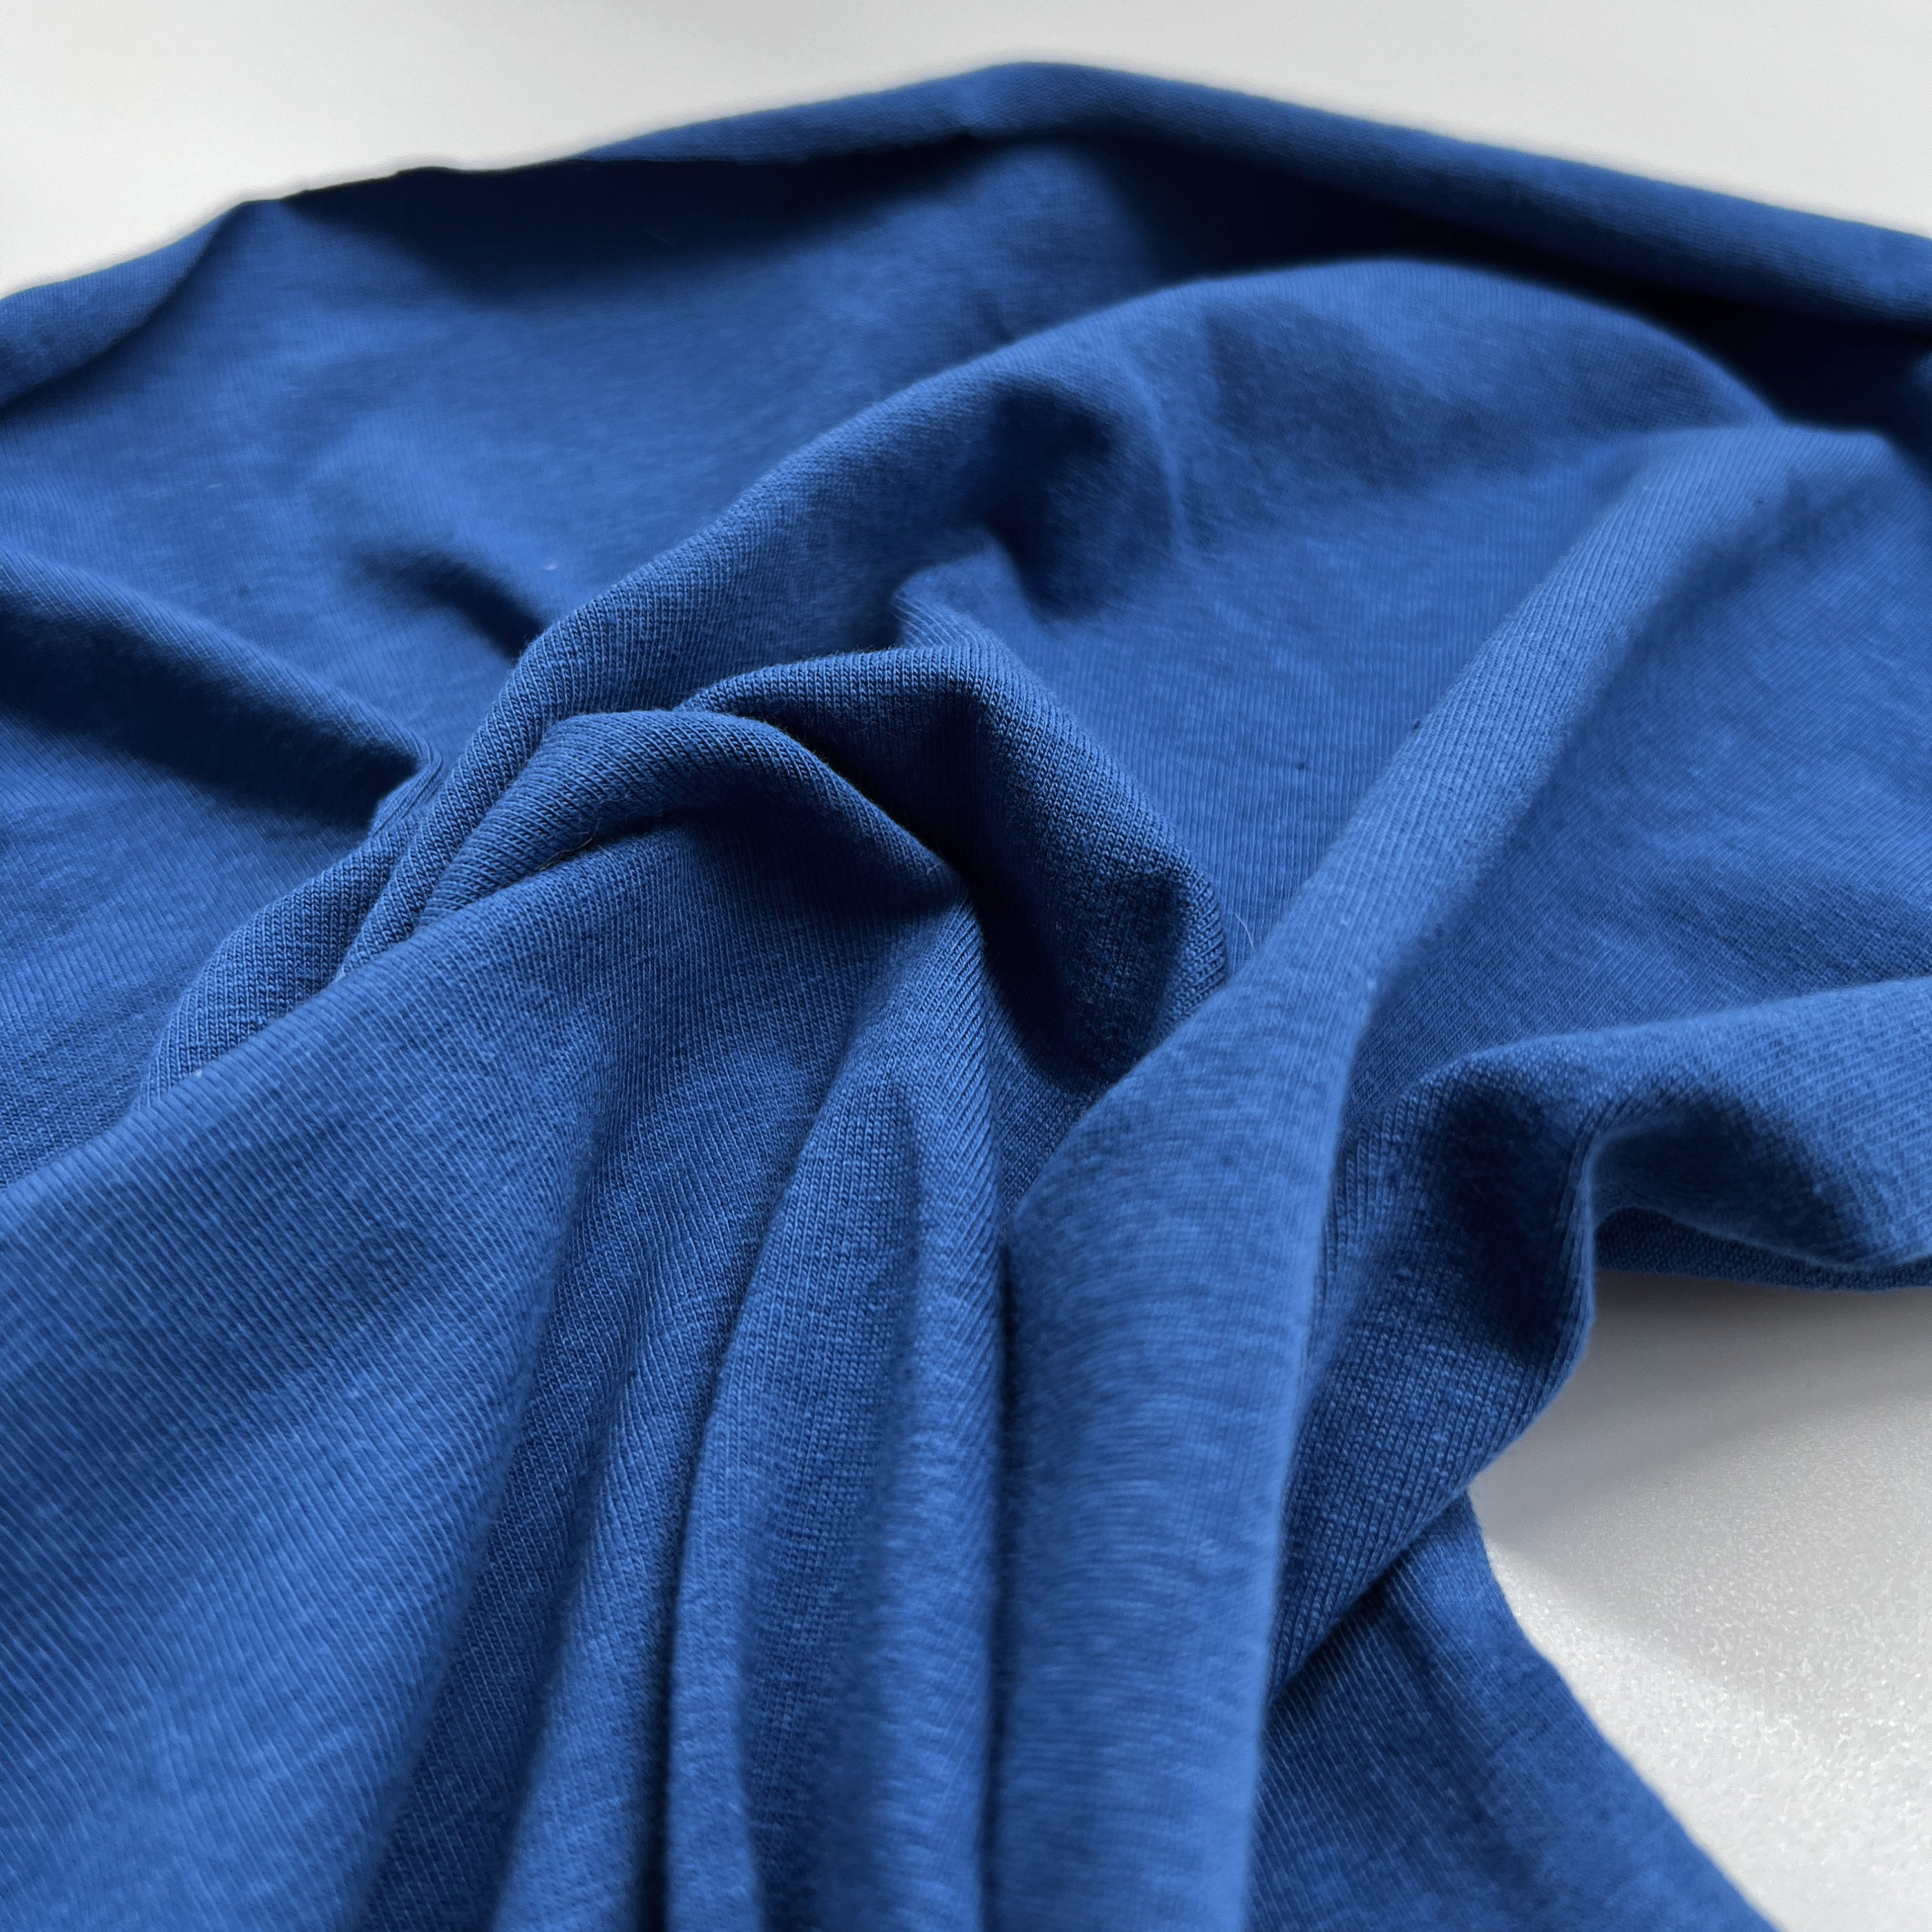 CLEARANCE- Blue Cotton Spandex Knit Jersey Fabric– by 2 Yard Pieces